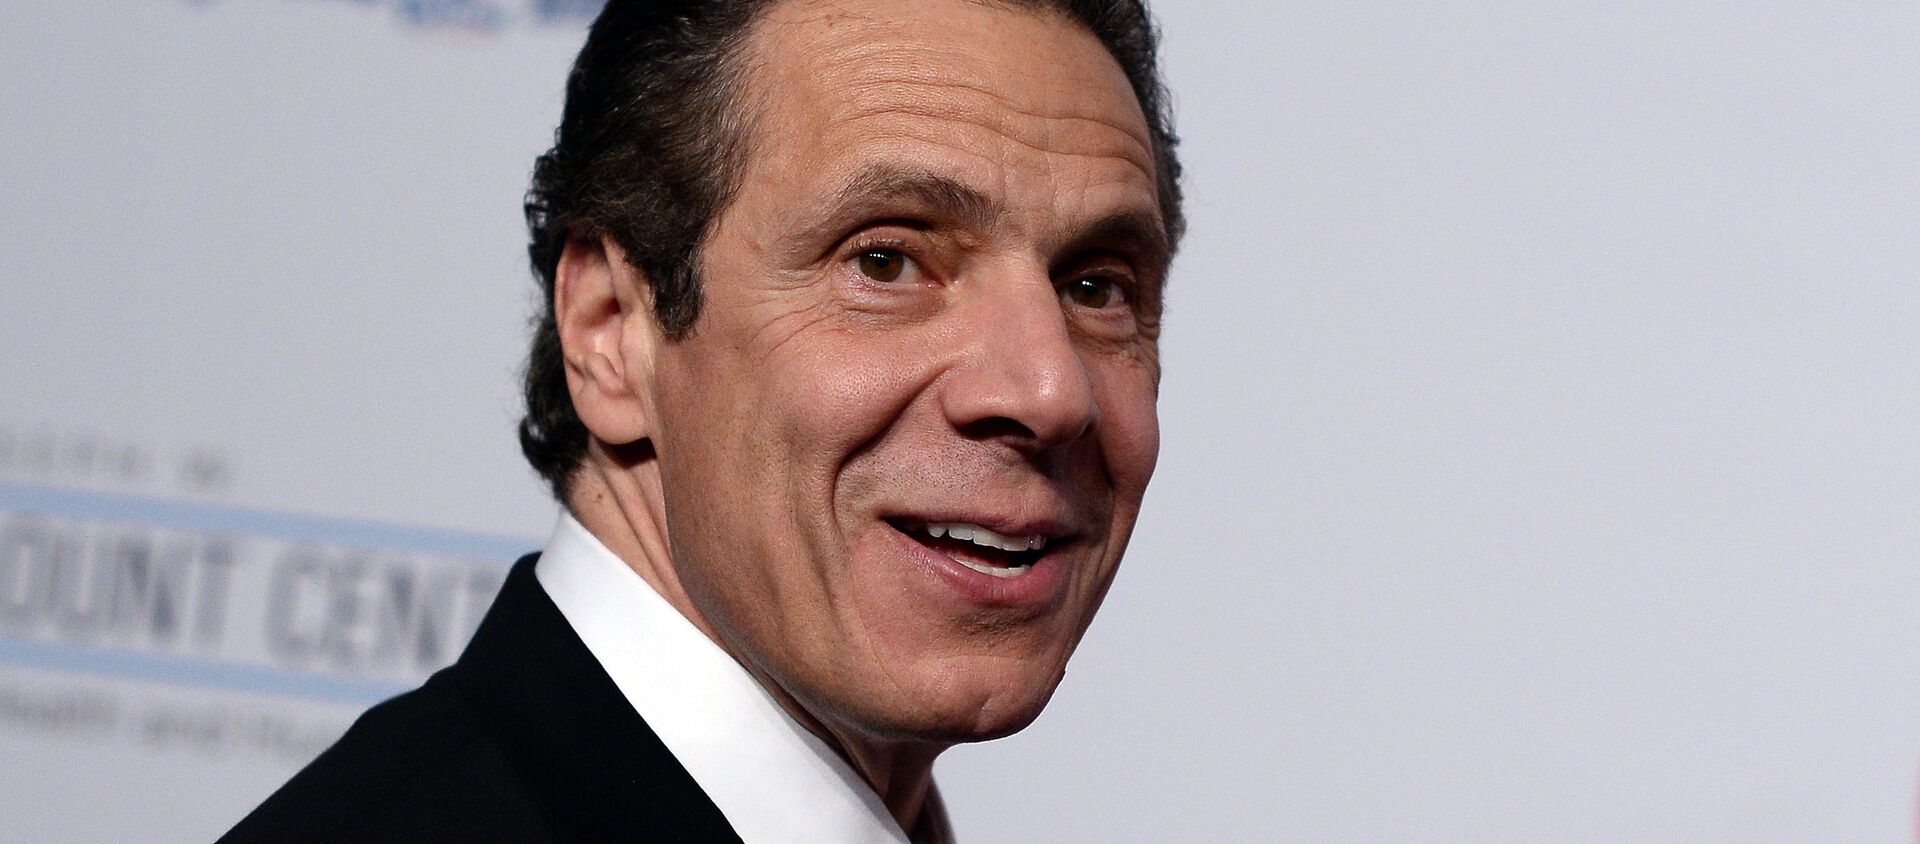 New York Governor Andrew Cuomo, arrives to attend the Elton John AIDS Foundation's 13th Annual An Enduring Vision Benefit on October 28, 2014 in New York - Sputnik International, 1920, 01.03.2021